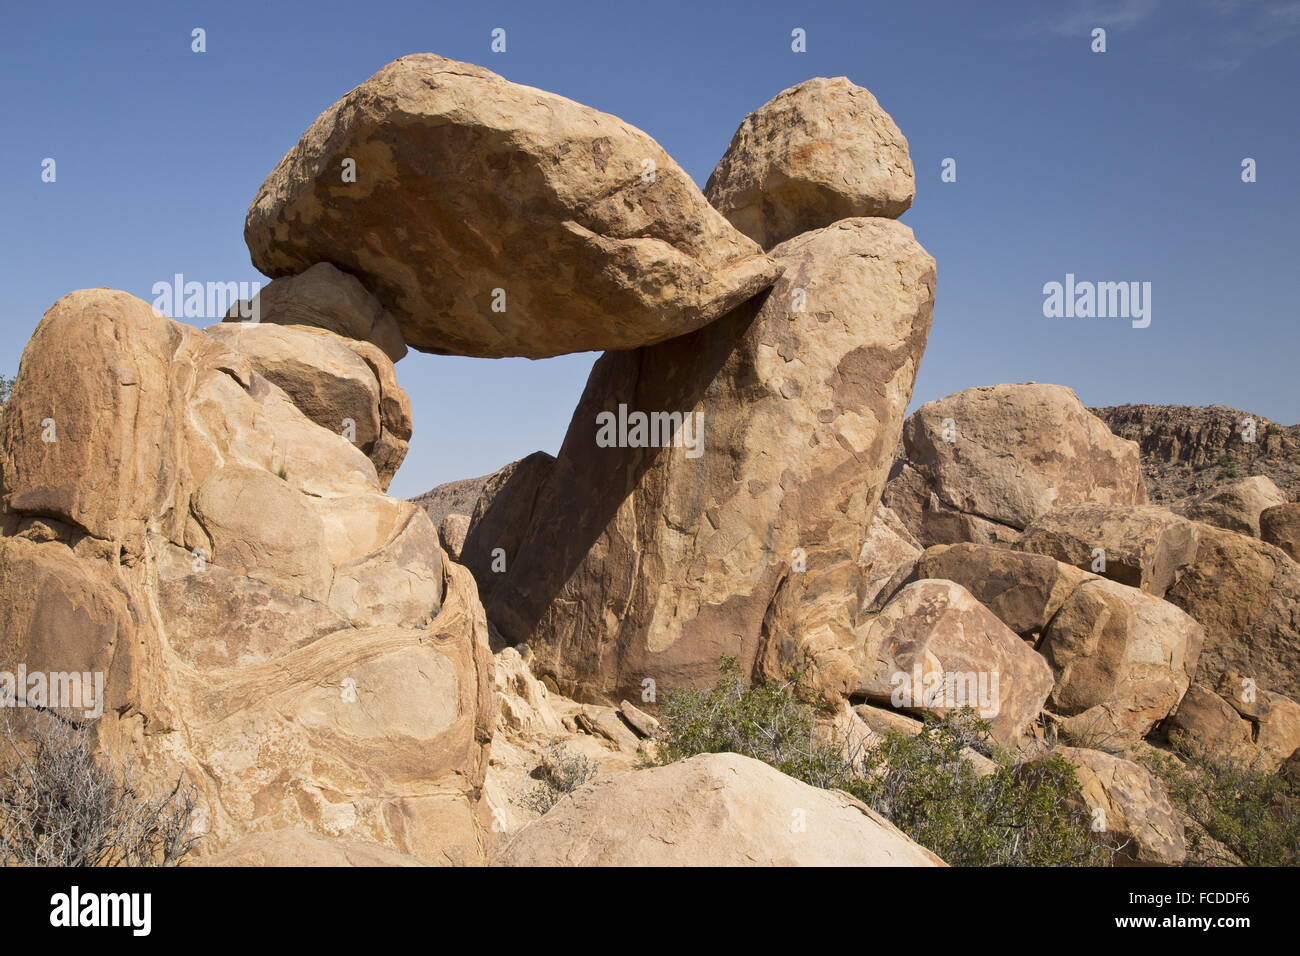 Balancing rocks, eroded igneous rock - remains of a laccolith - in the Grapevine Hills,  Big Bend National Park, Texas. Stock Photo